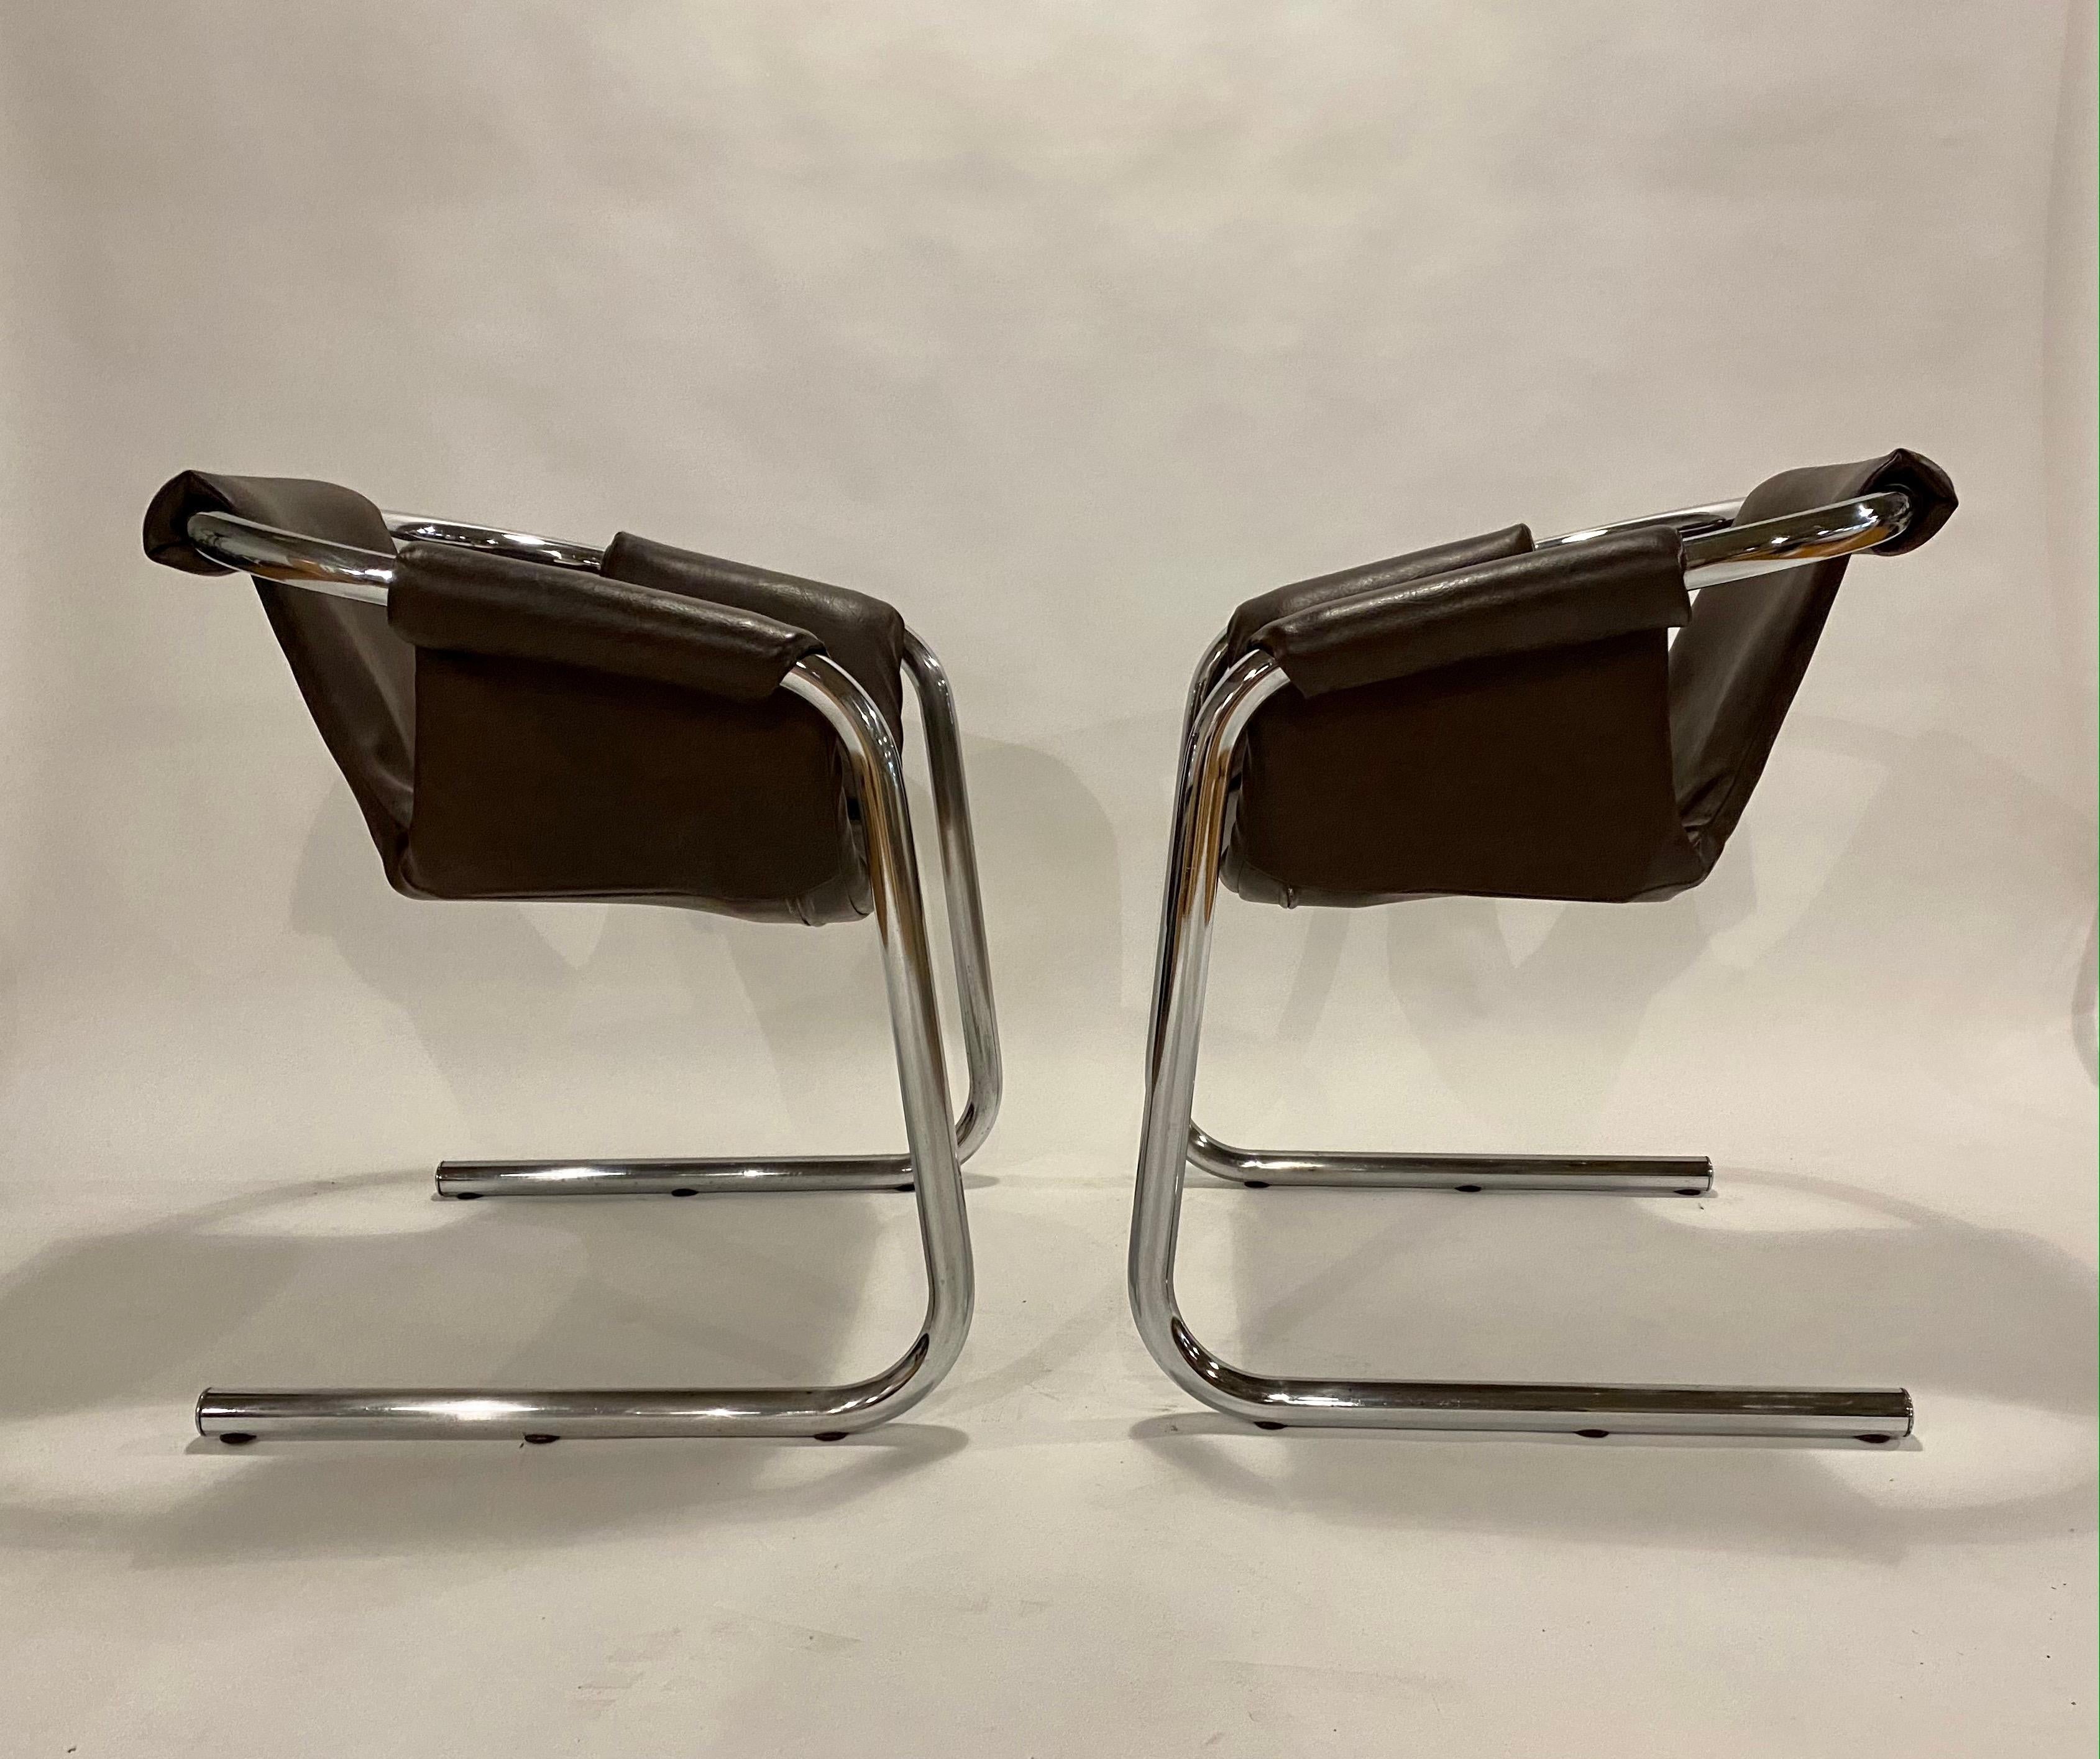 Polished 1970s Zermatt Sling Chairs for Vecta, Italy